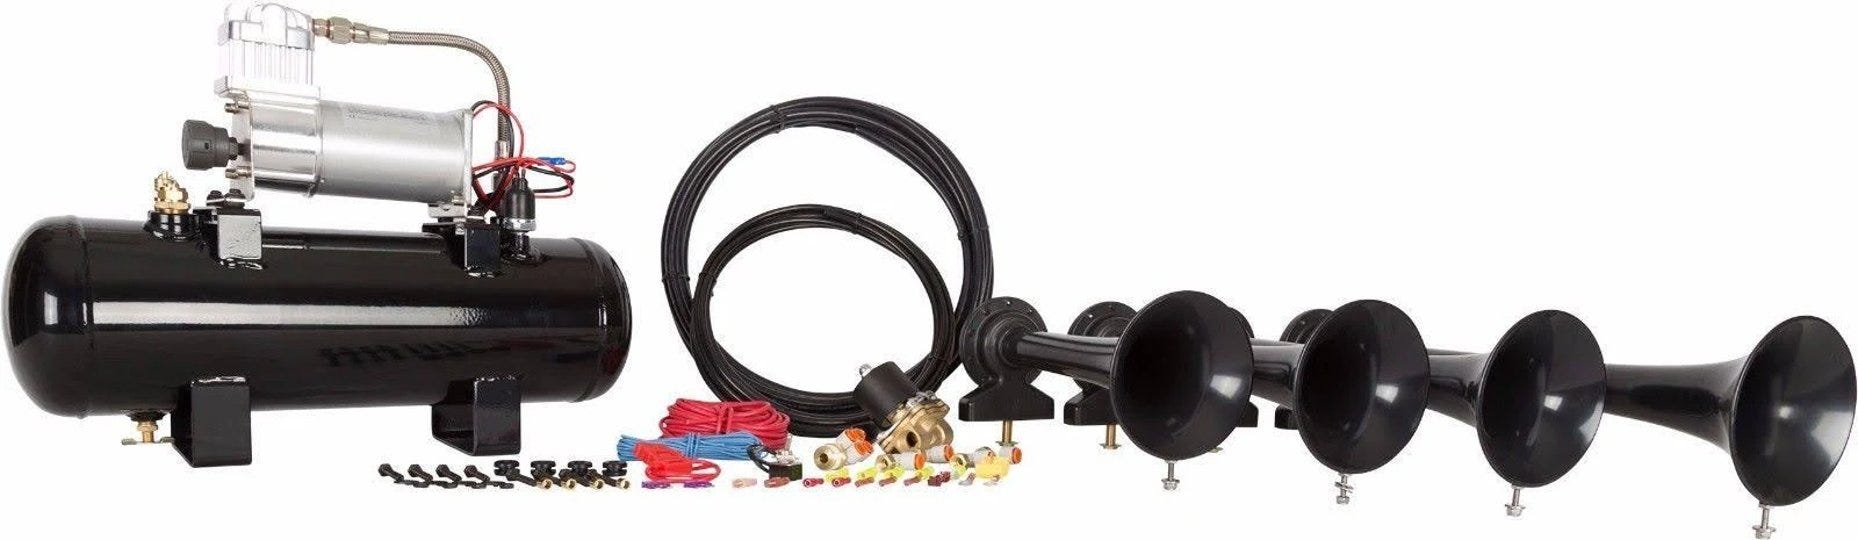 hornblasters-conductor-special-hk-s4-228vx-train-horn-kit-1